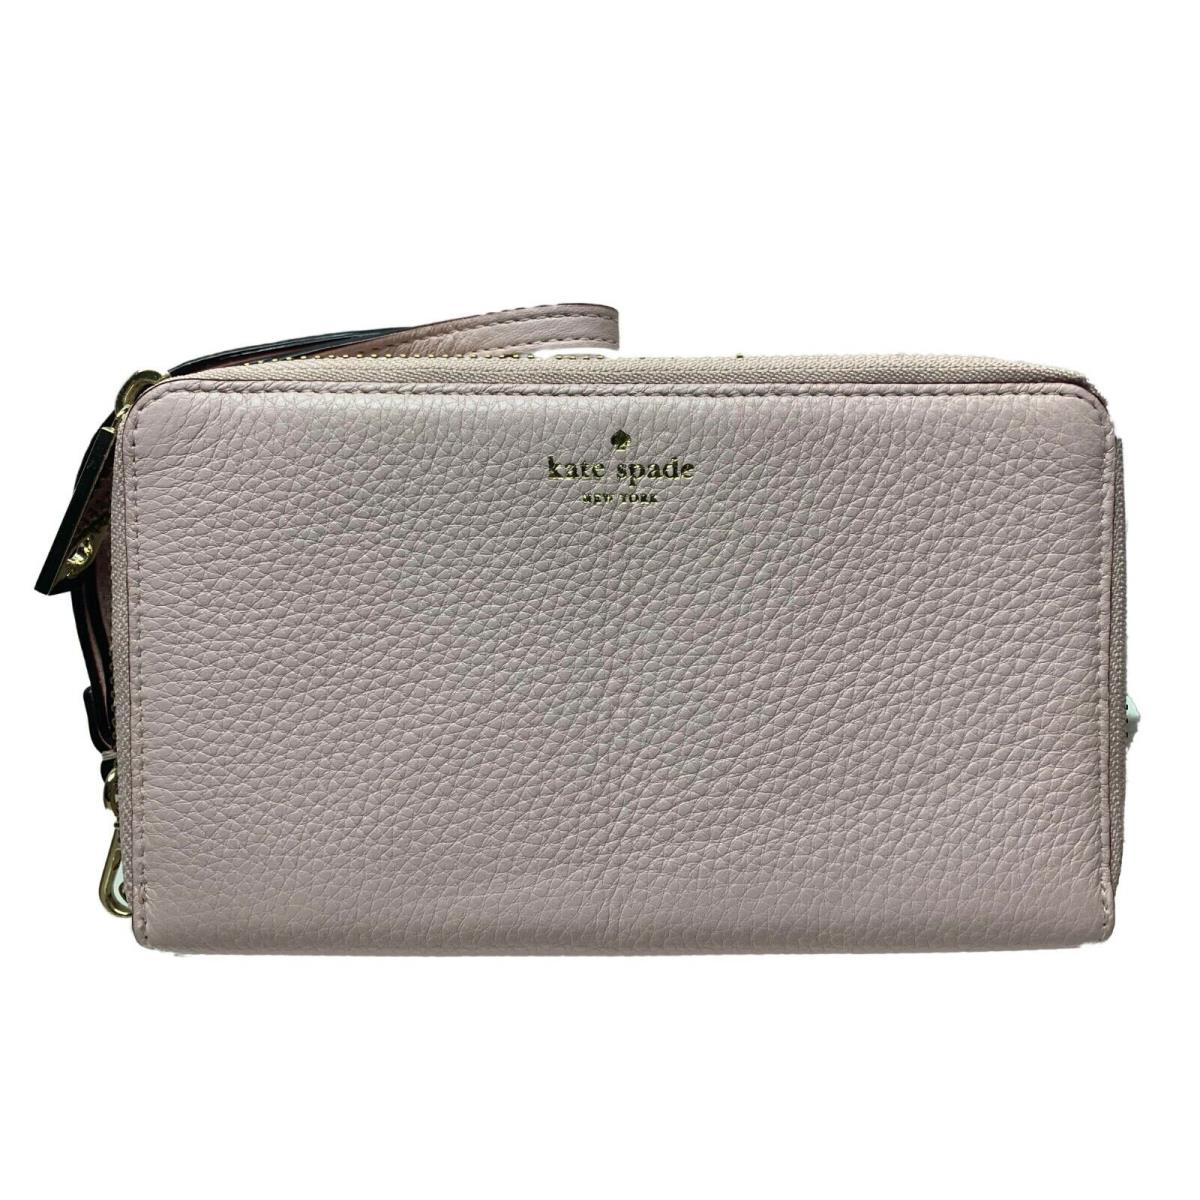 Kate Spade Grey Street Tiera Pebbled Leather Wallet Phone Case in Posypink